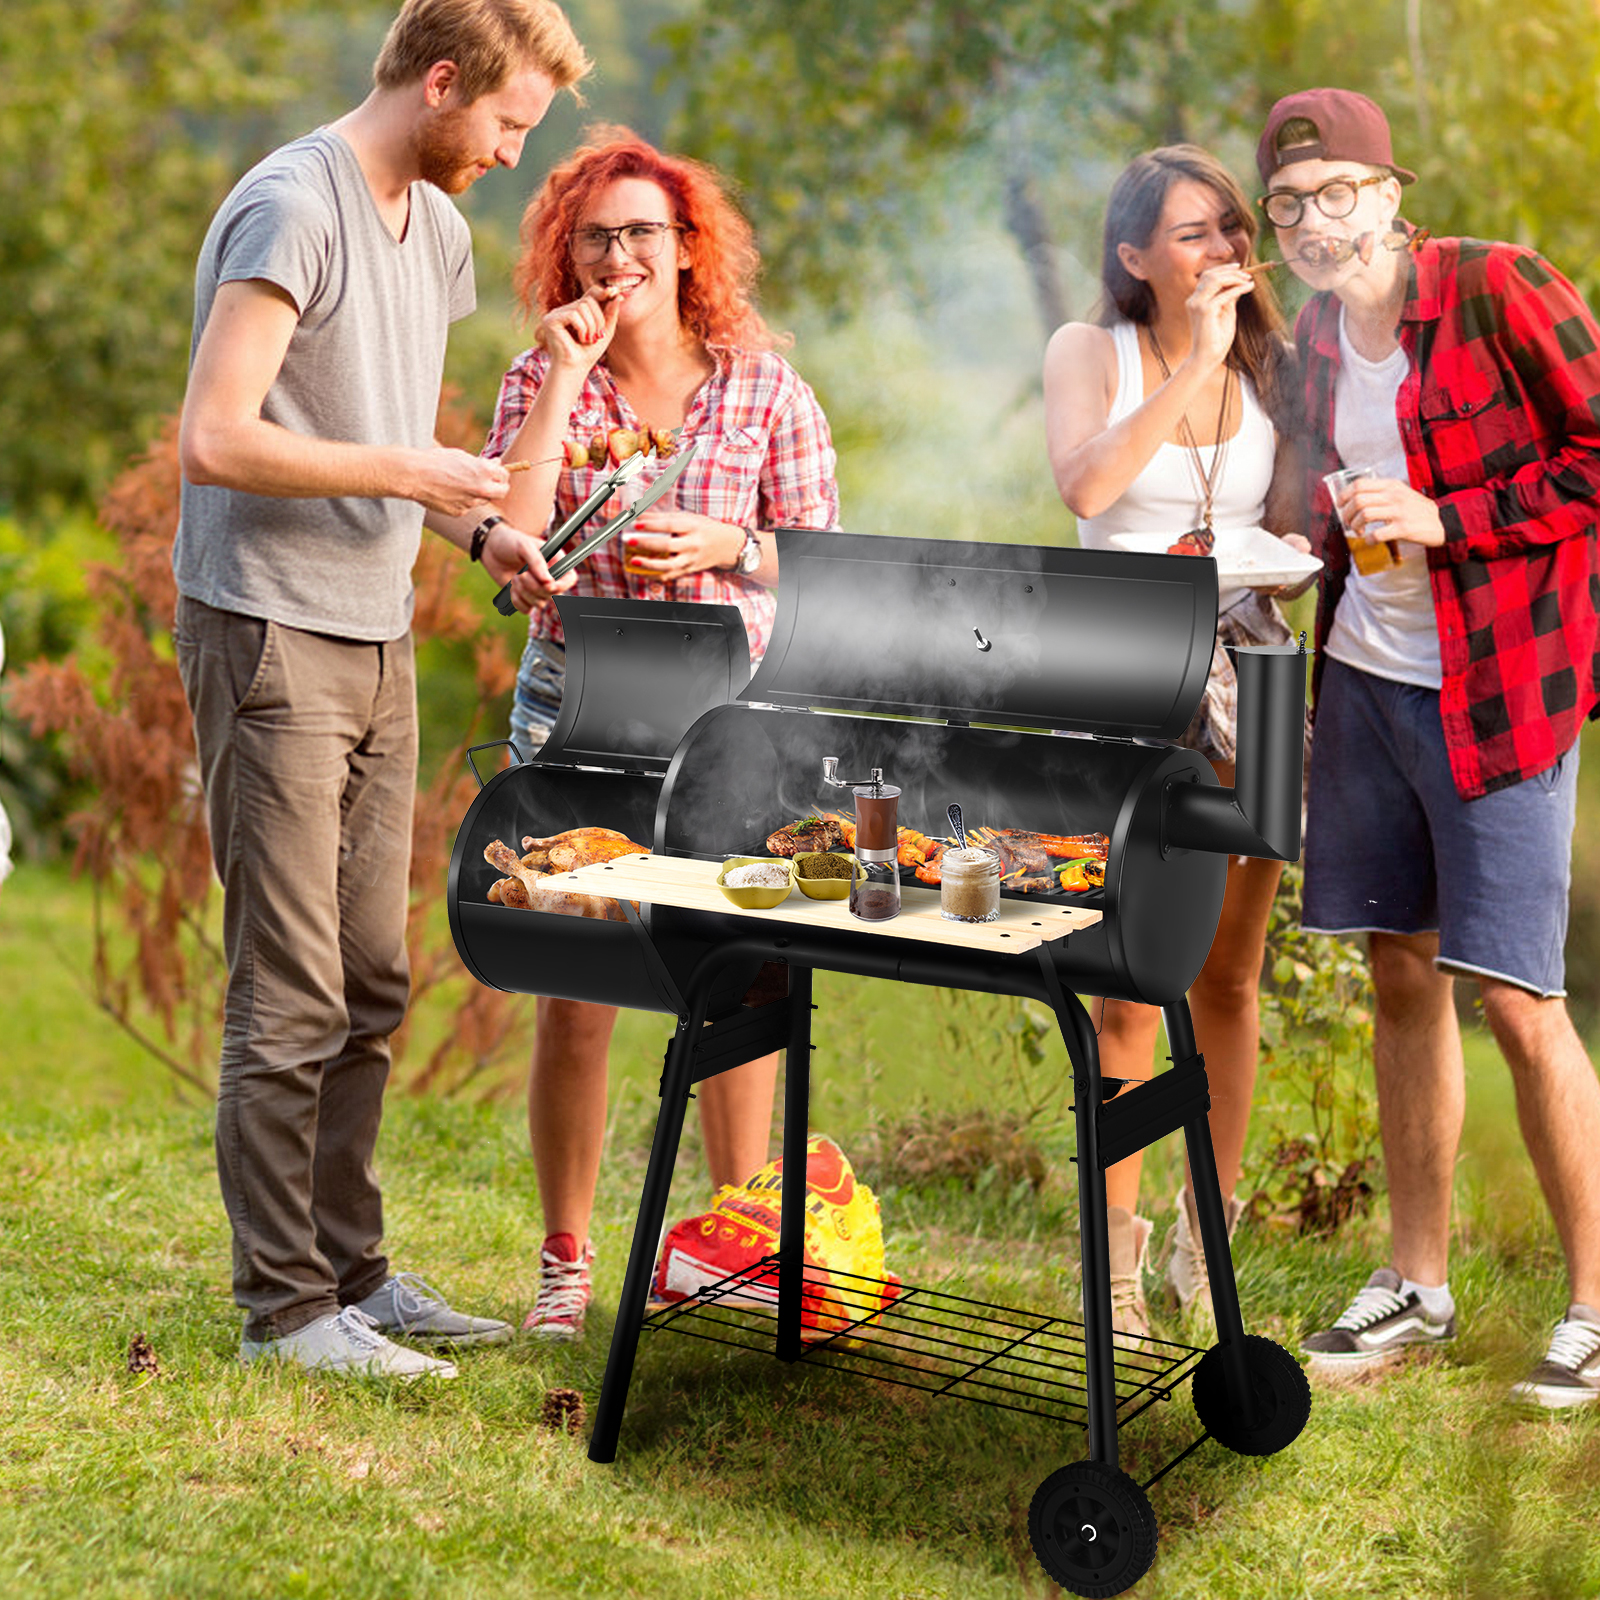 Topbuy BBQ Grill Charcoal Barbecue Meat Smoker Backyard Camping - image 4 of 10